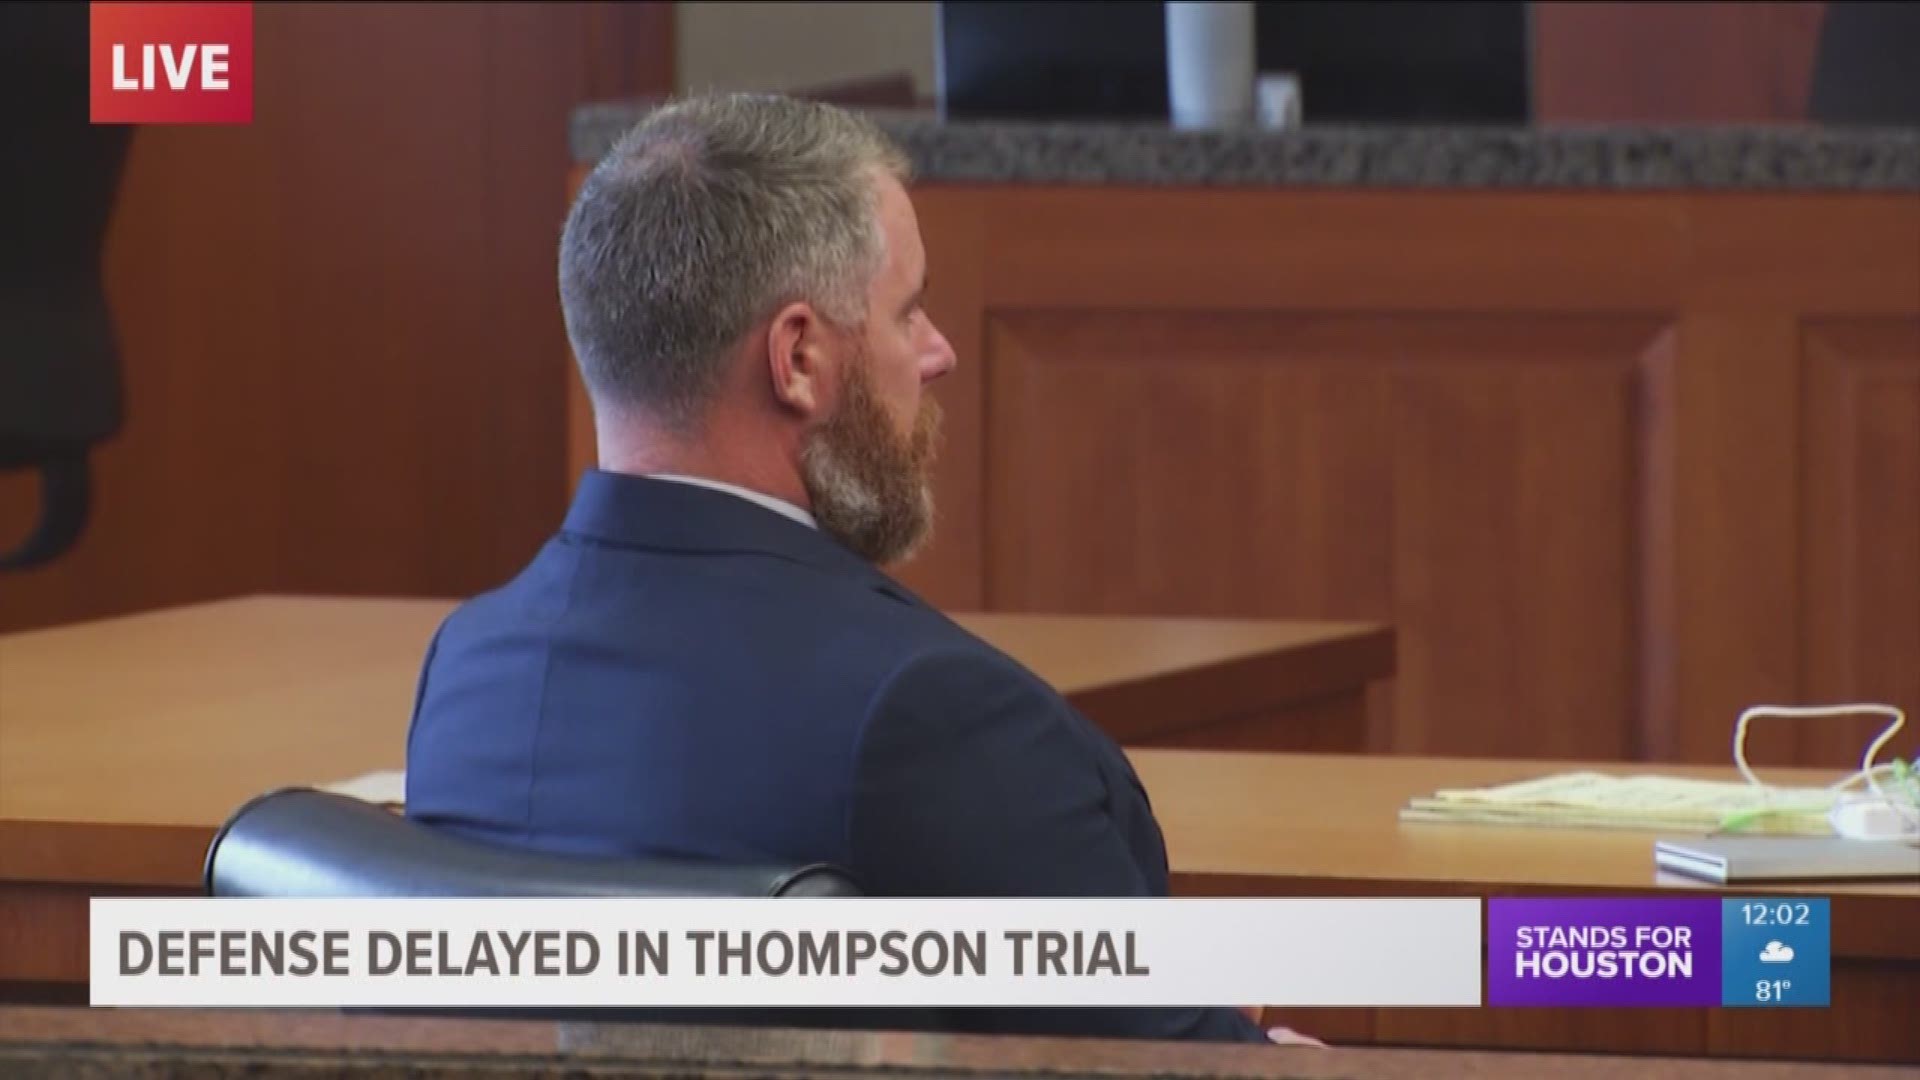 Closing arguments could begin Thursday afternoon the trial of Terry Thompson, the man accused of murdering 24-year-old John Hernandez outside a Crosby-area Denny's restaurant last year.